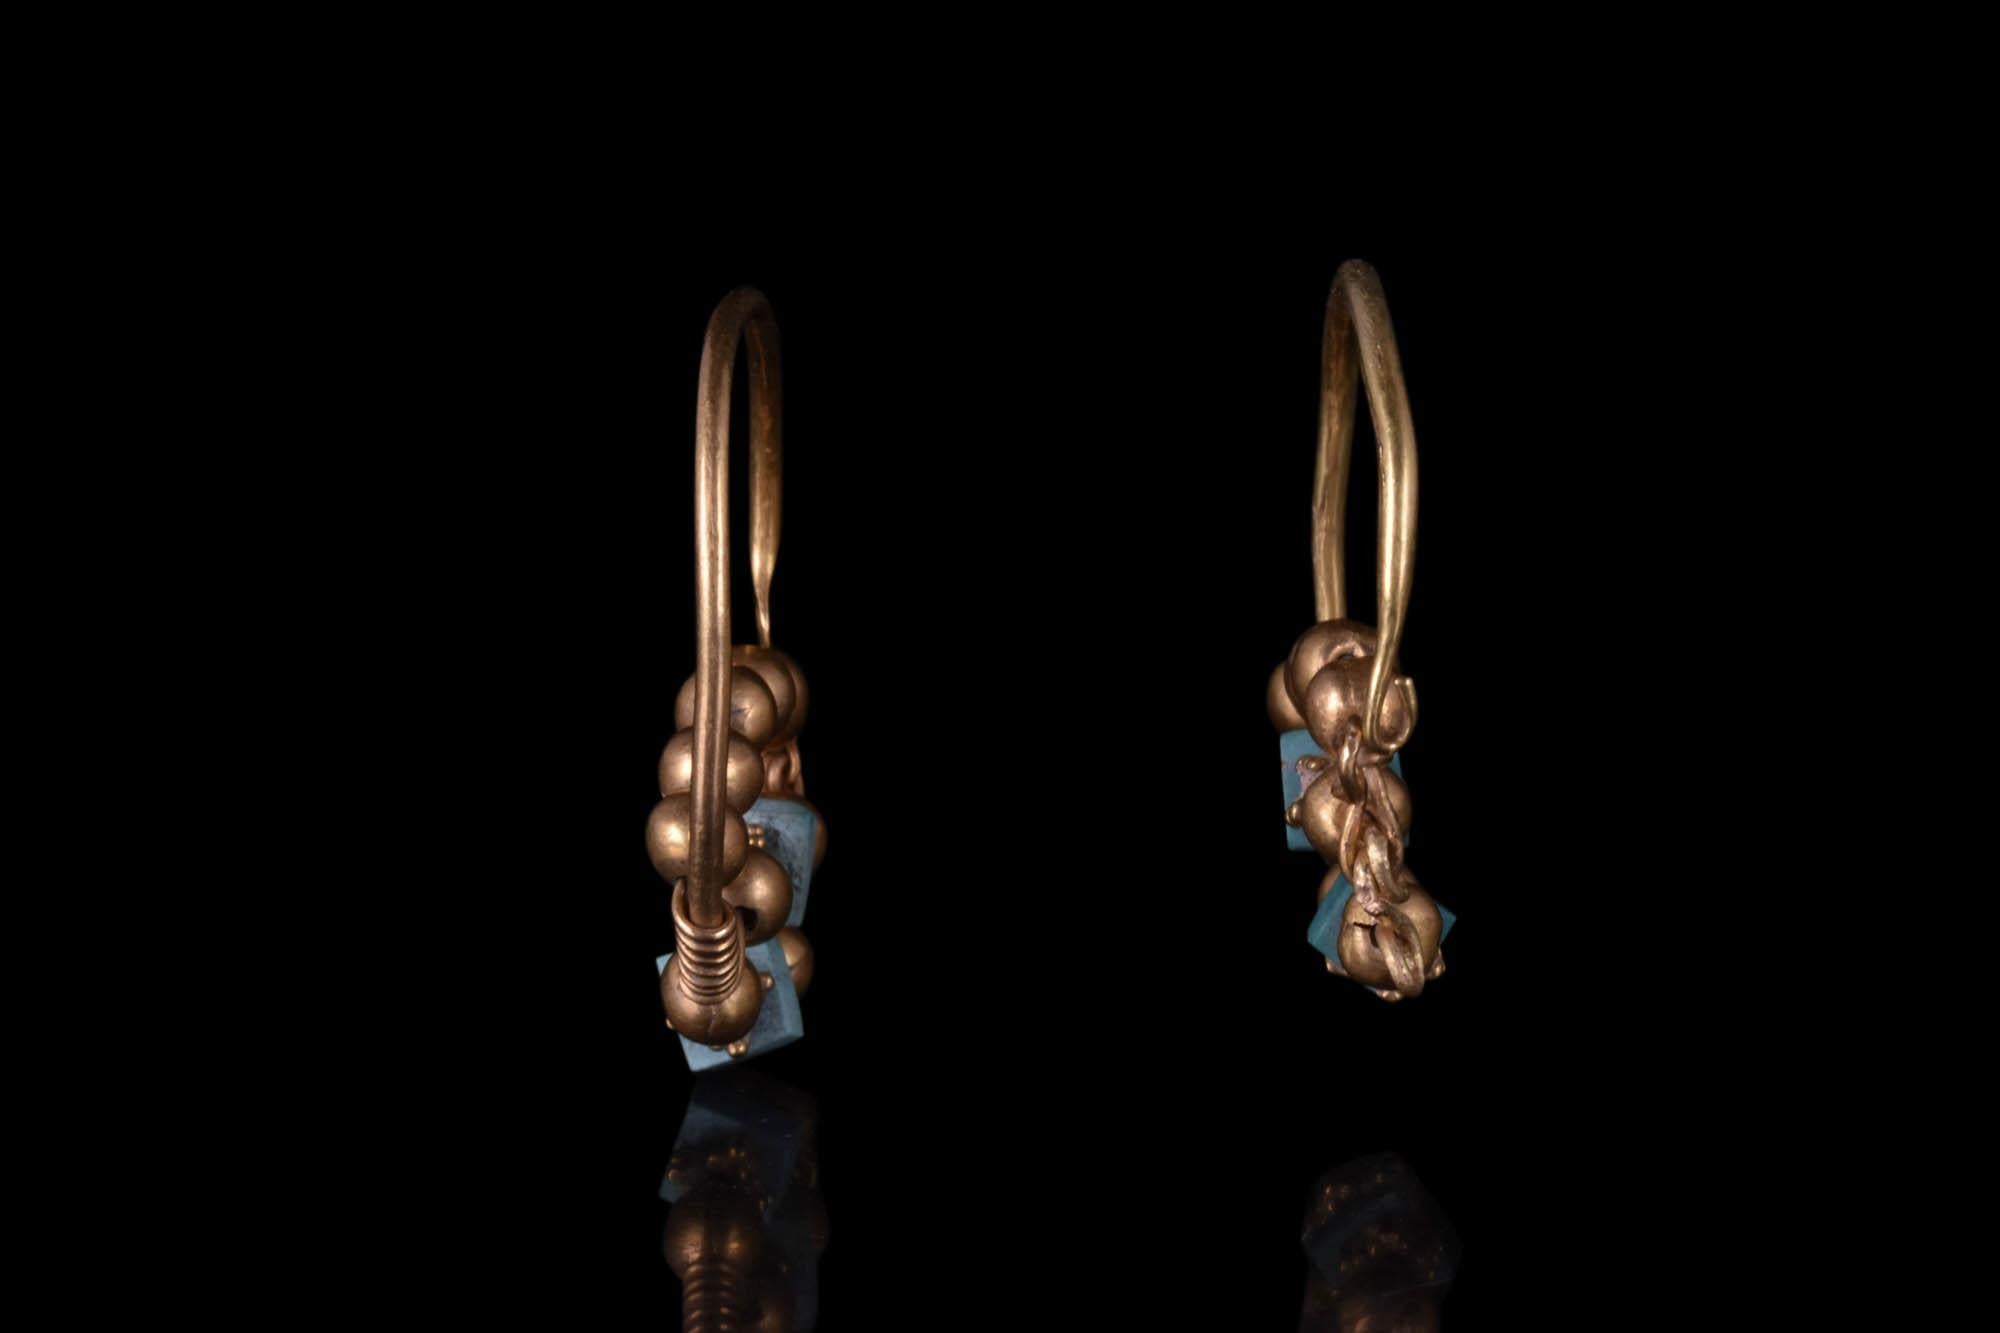 Medieval A Matched Pair of Gold Earrings For Sale